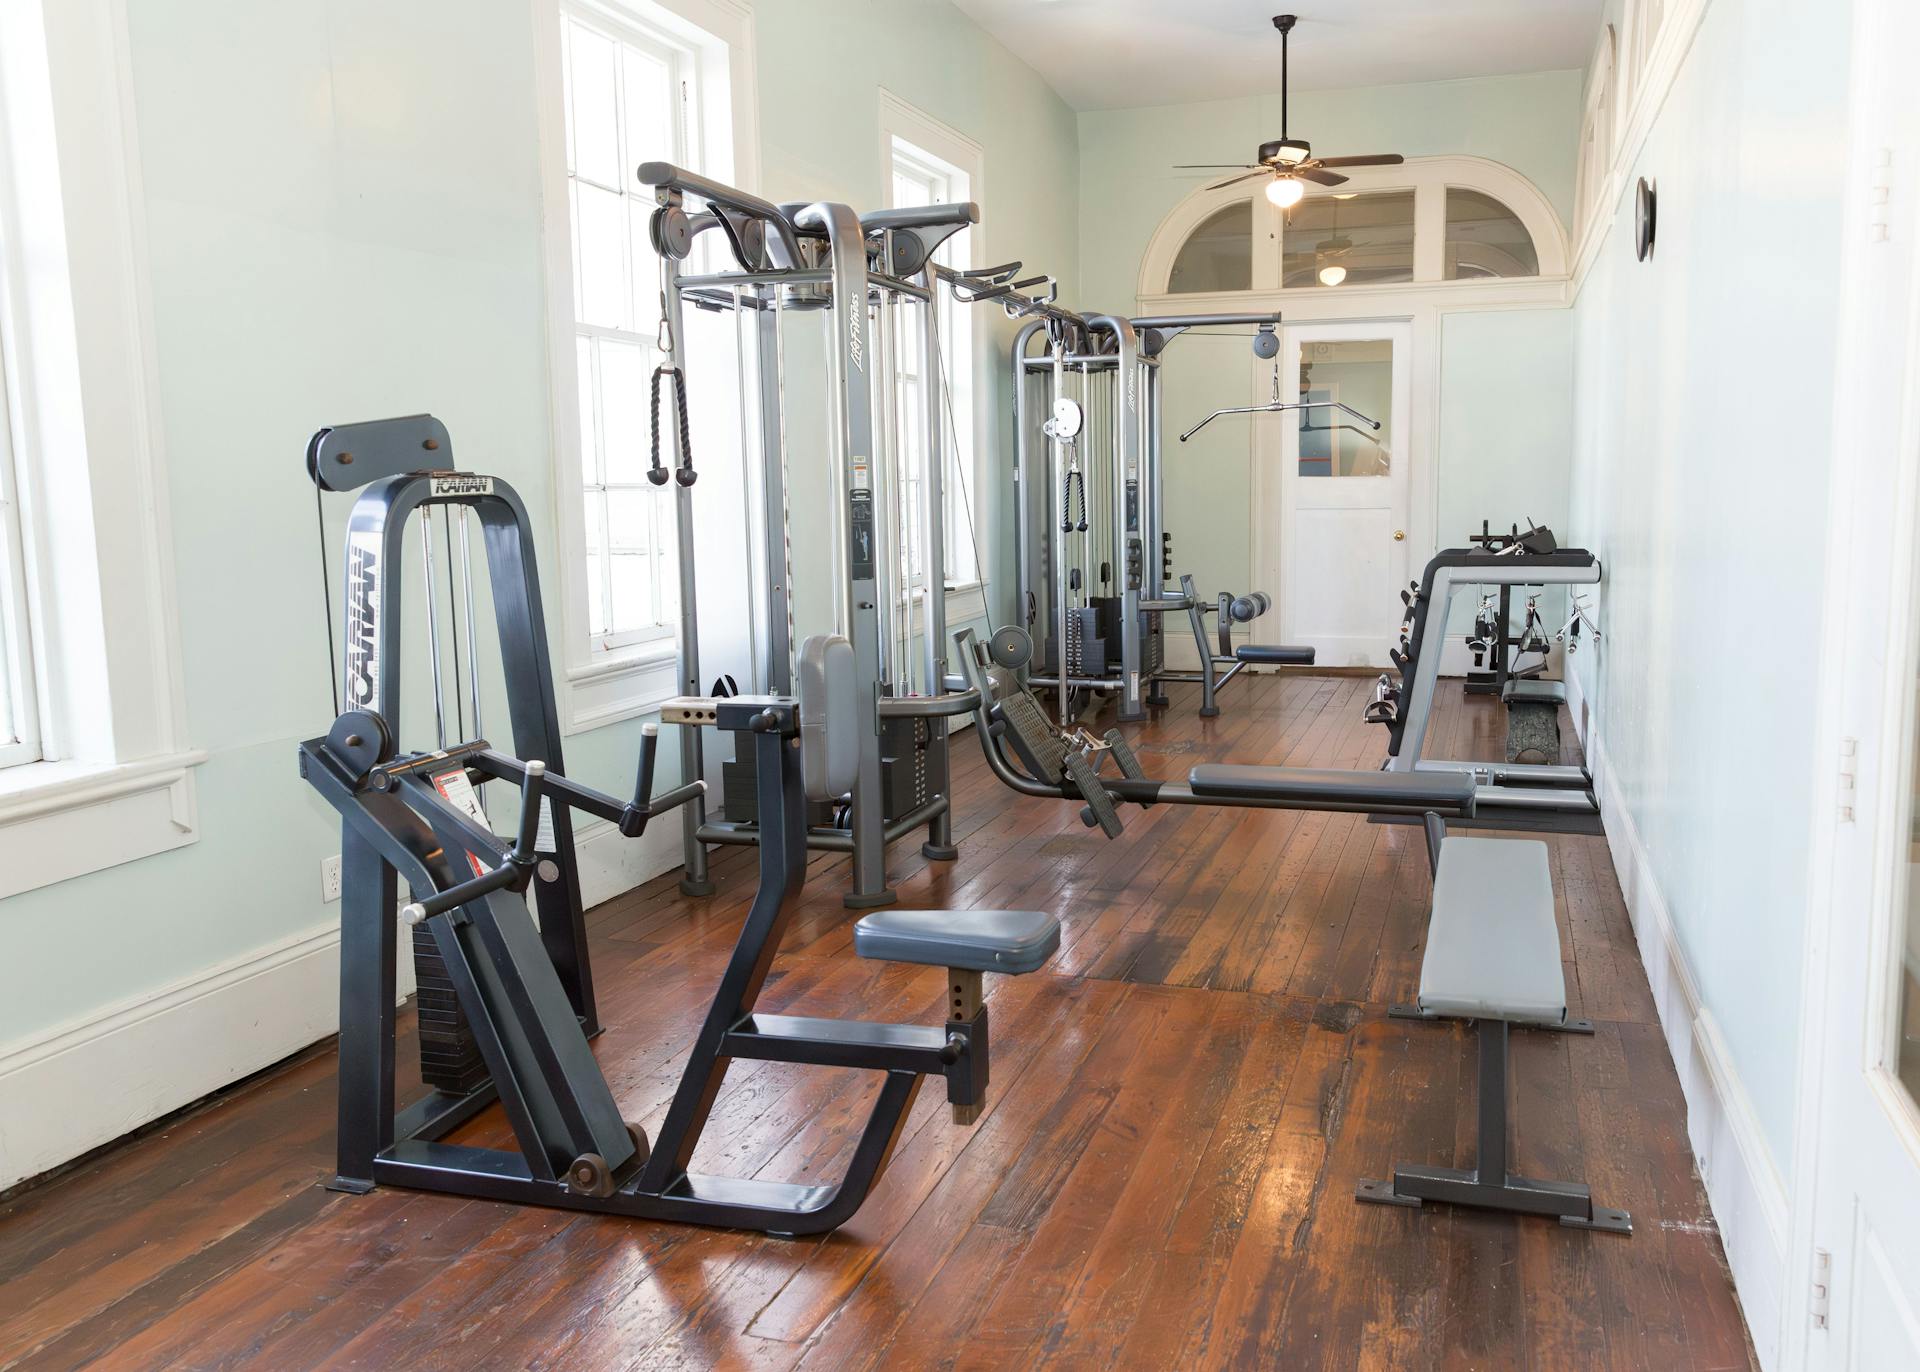 /fitness/Strength Training/new orleans athletic club-strength training-cable room new.jpg